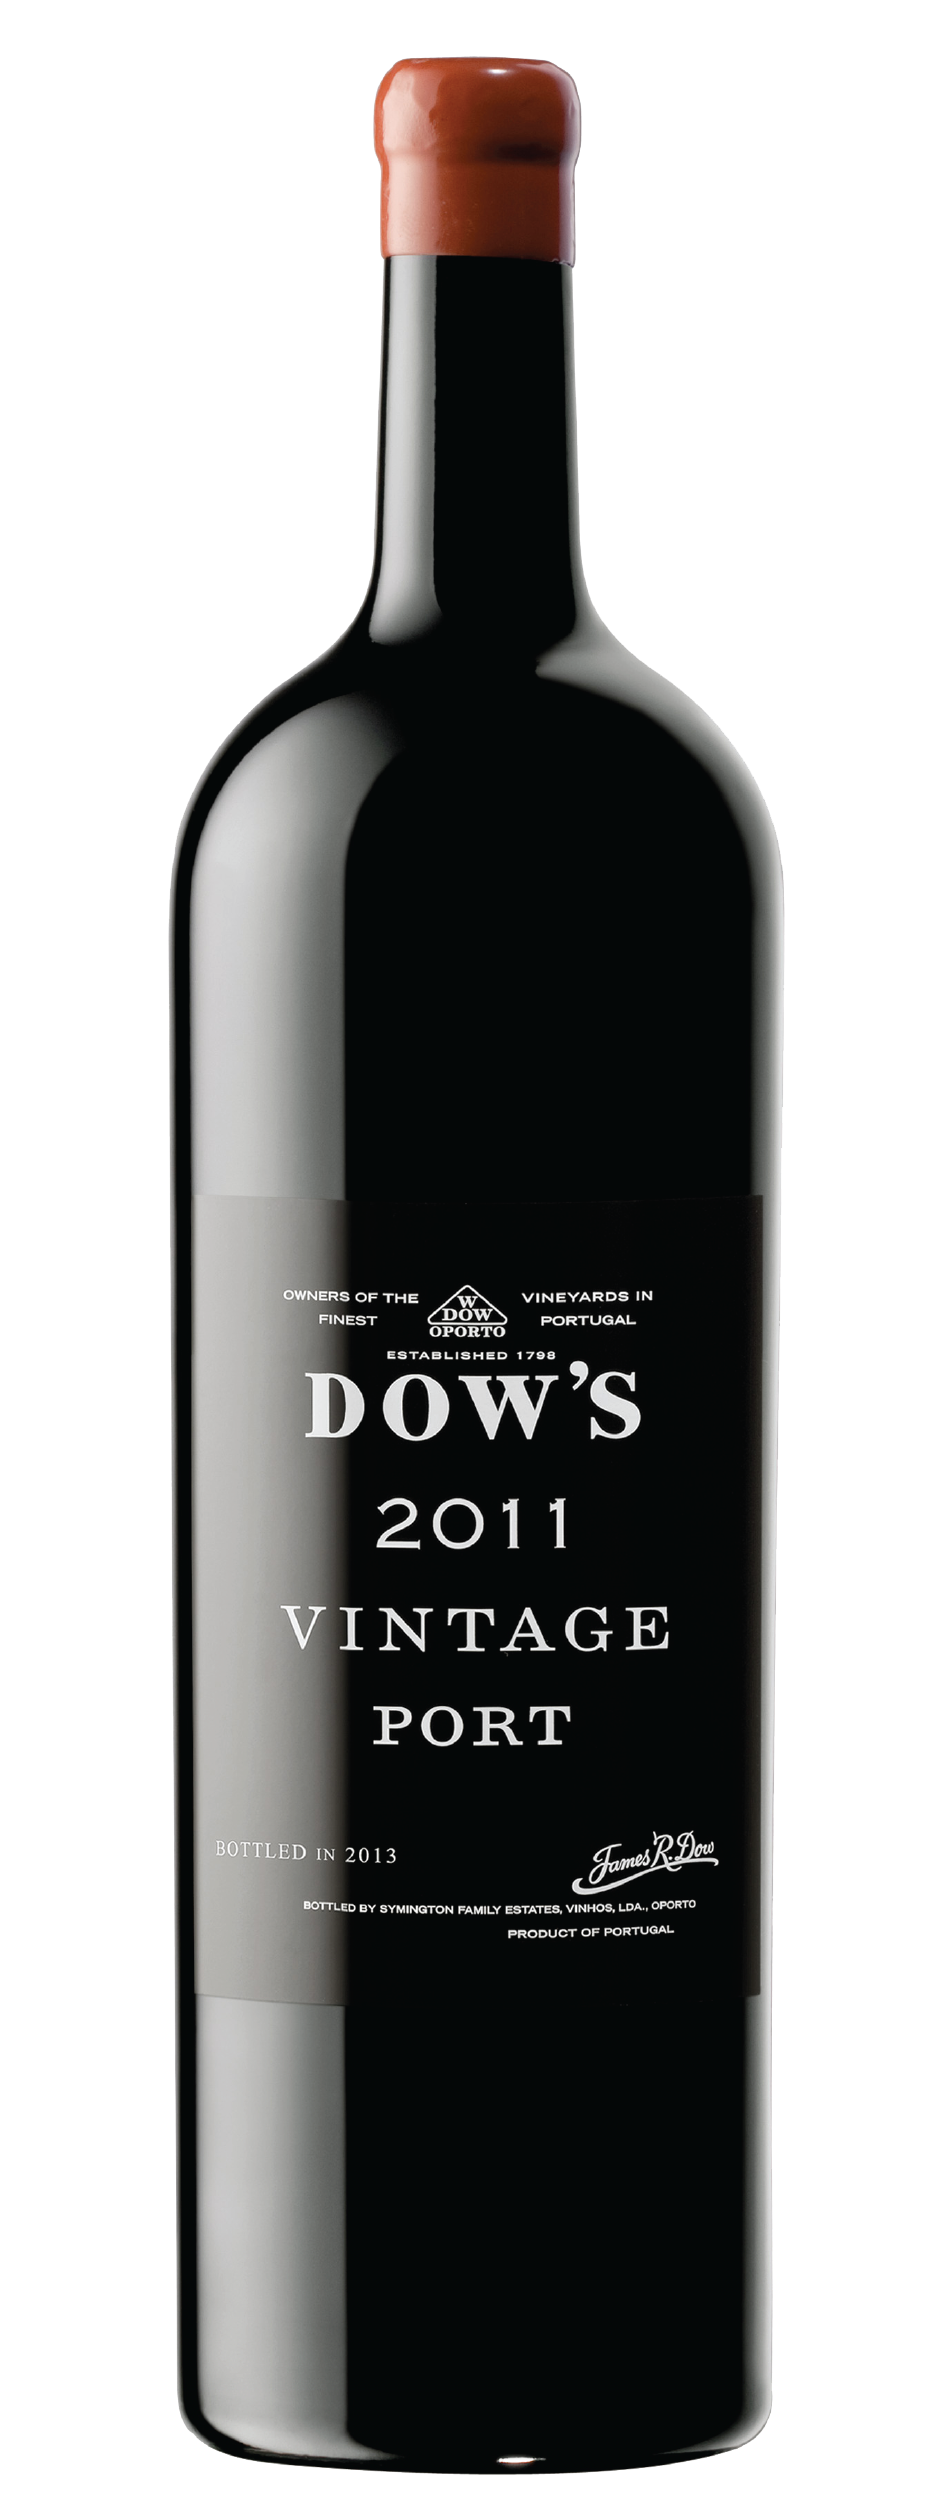 Product Image for DOW'S VINTAGE PORT 2011 - DOUBLE MAGNUM (3L)